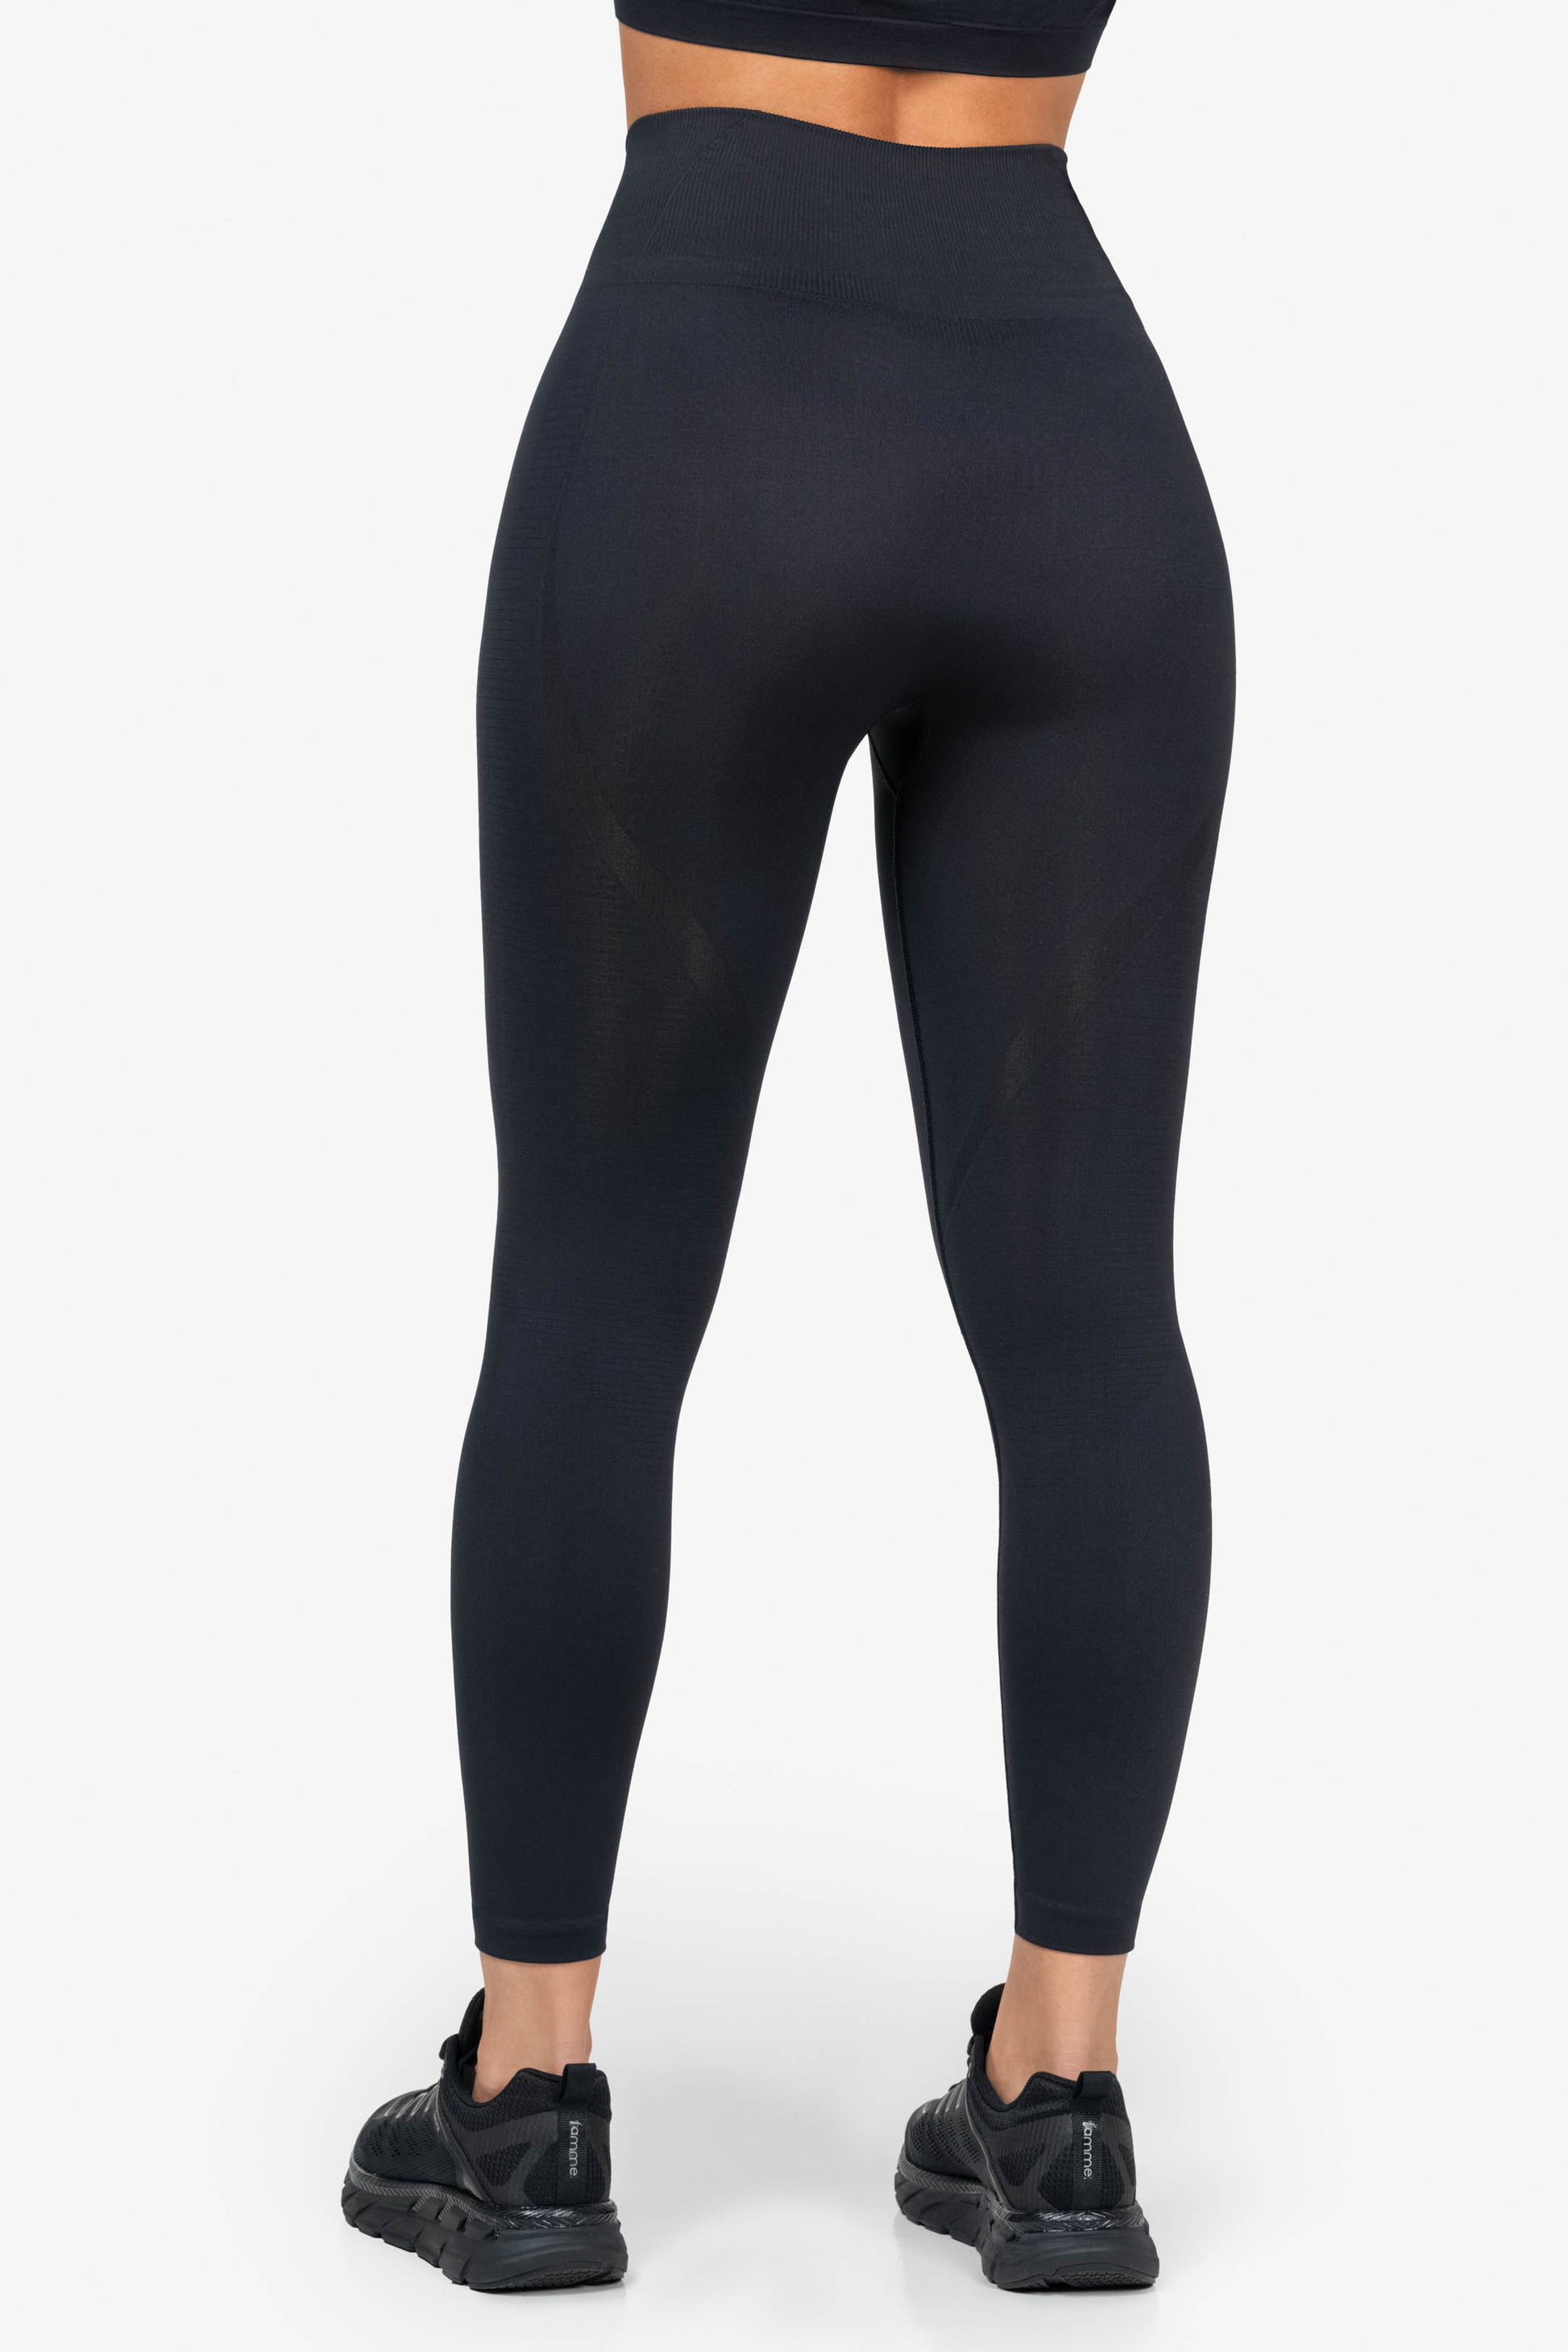 Does this brand have the BEST seamless leggings?!